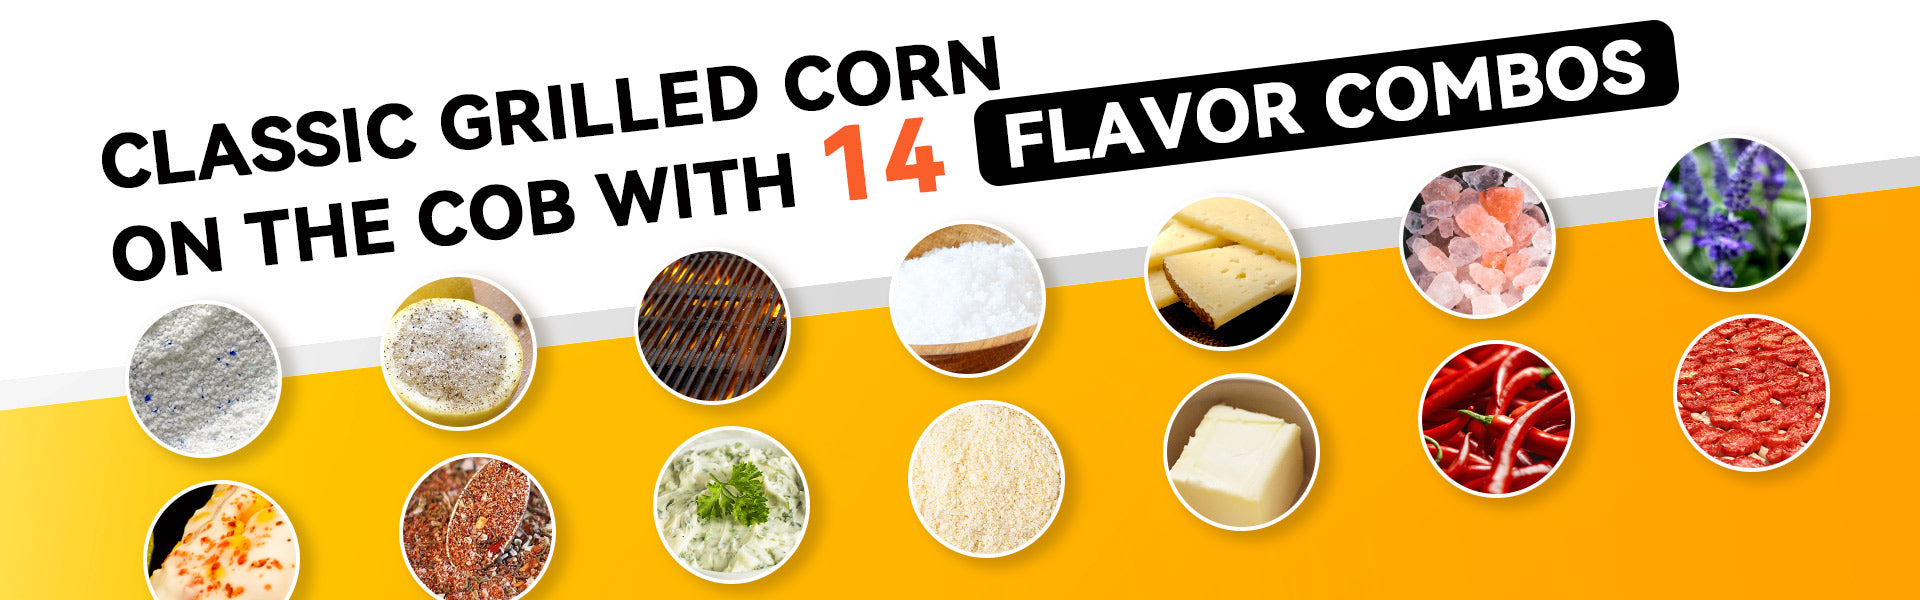 Classic Grilled Corn on The Cob with 14 Flavor Combos